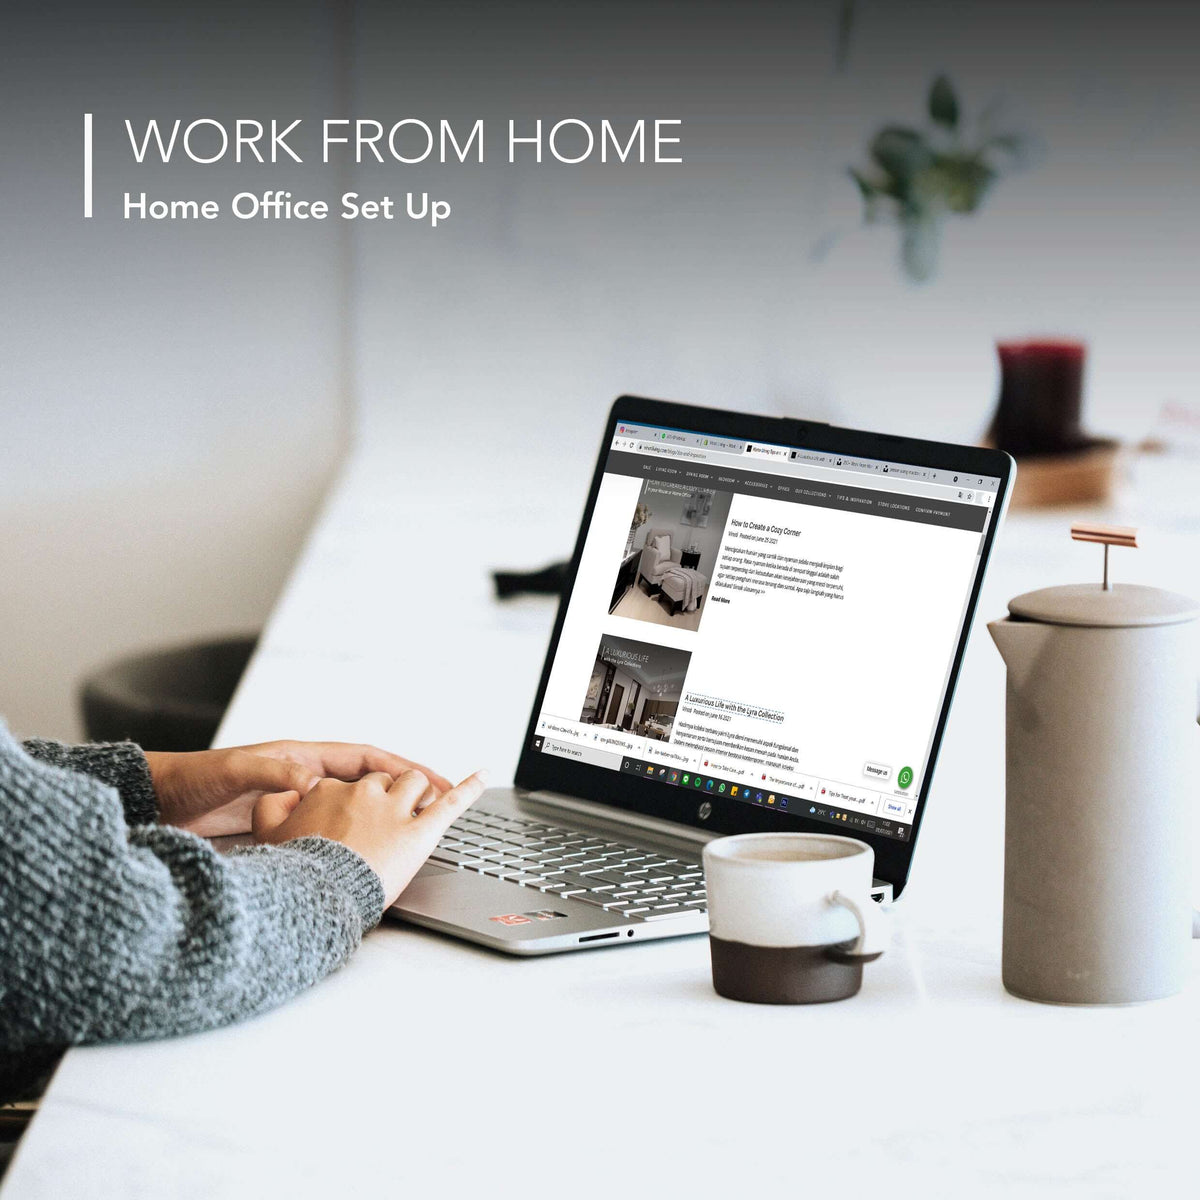 Work From Home - Home Office Set Up